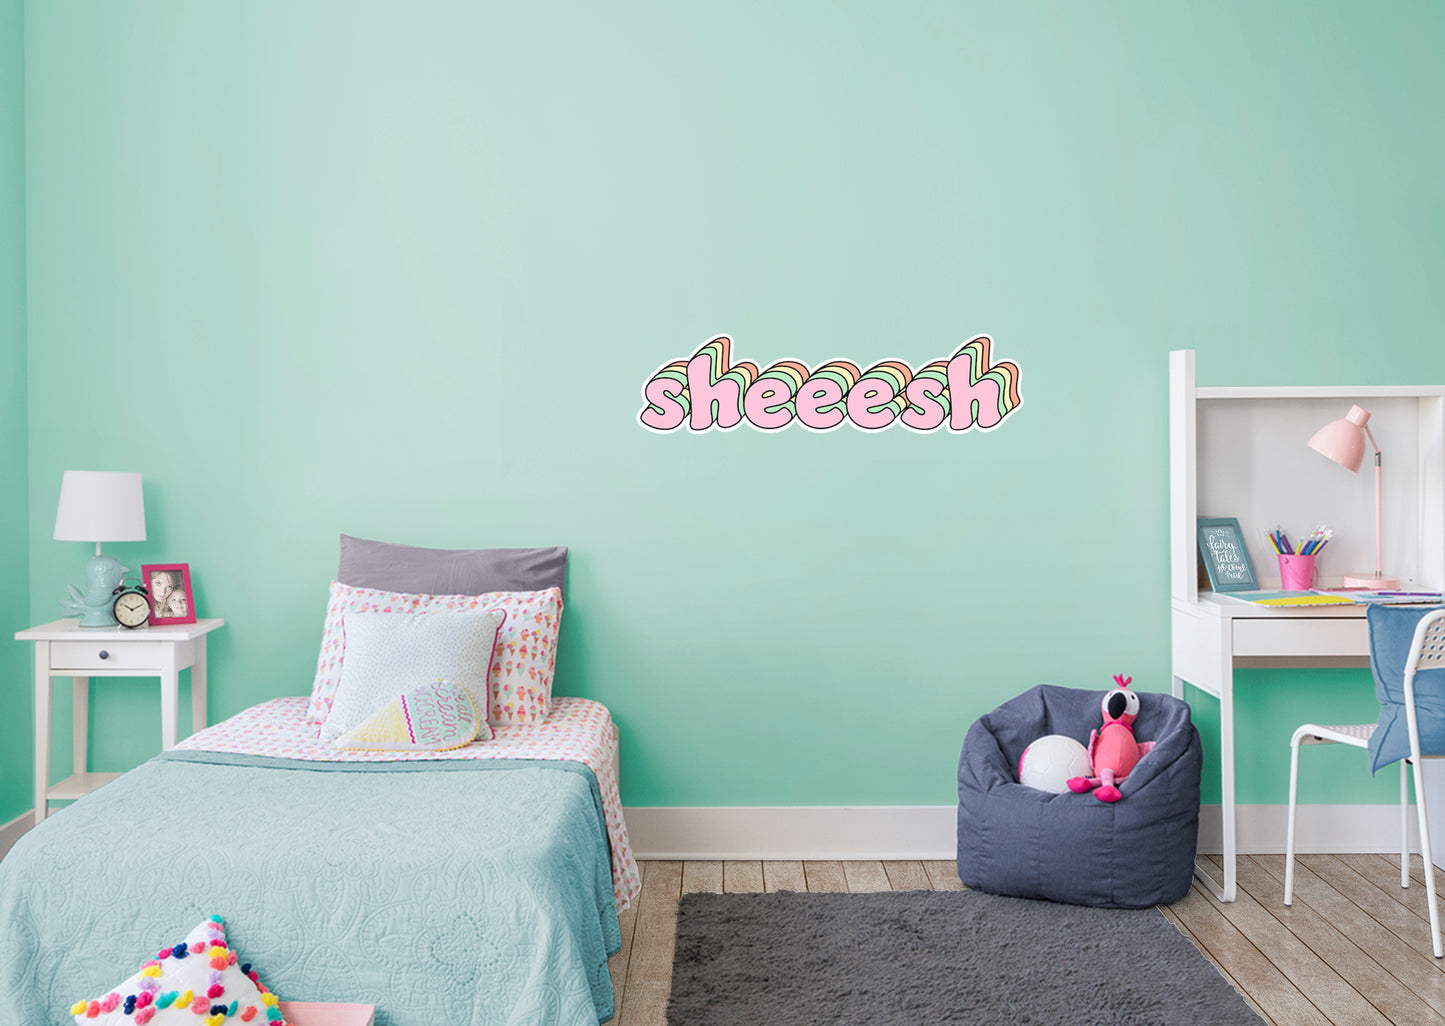 Sheeesh Pink 3D Lettering        - Officially Licensed Big Moods Removable     Adhesive Decal